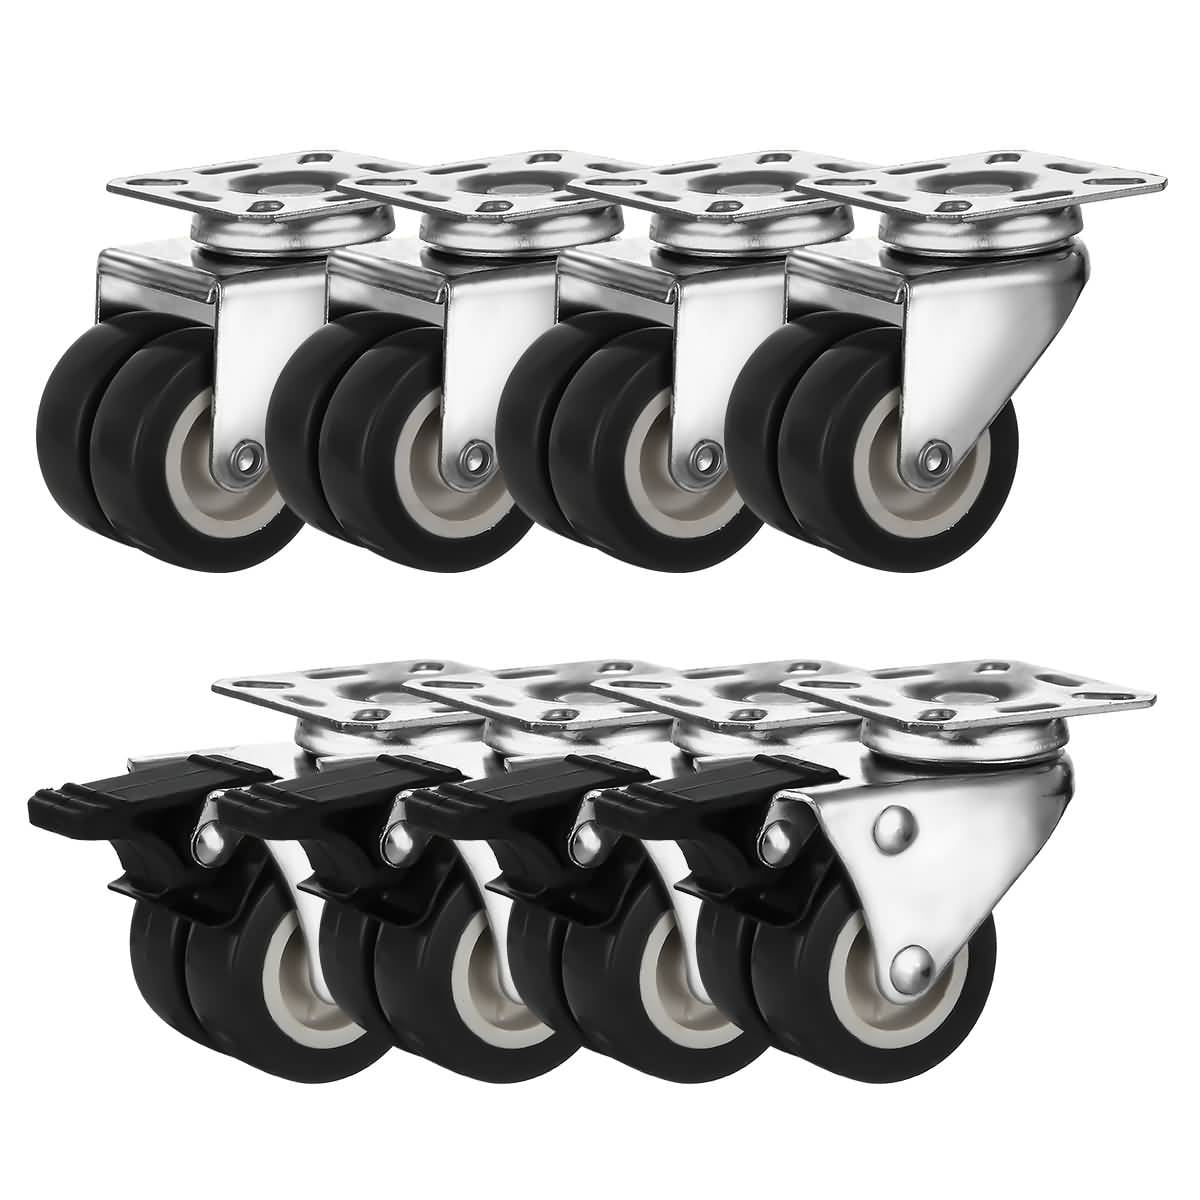 Universal Wheels Pulley Wheel High Hardness Swivel Caster Weight Resistance Wheels,for Cart Wheels